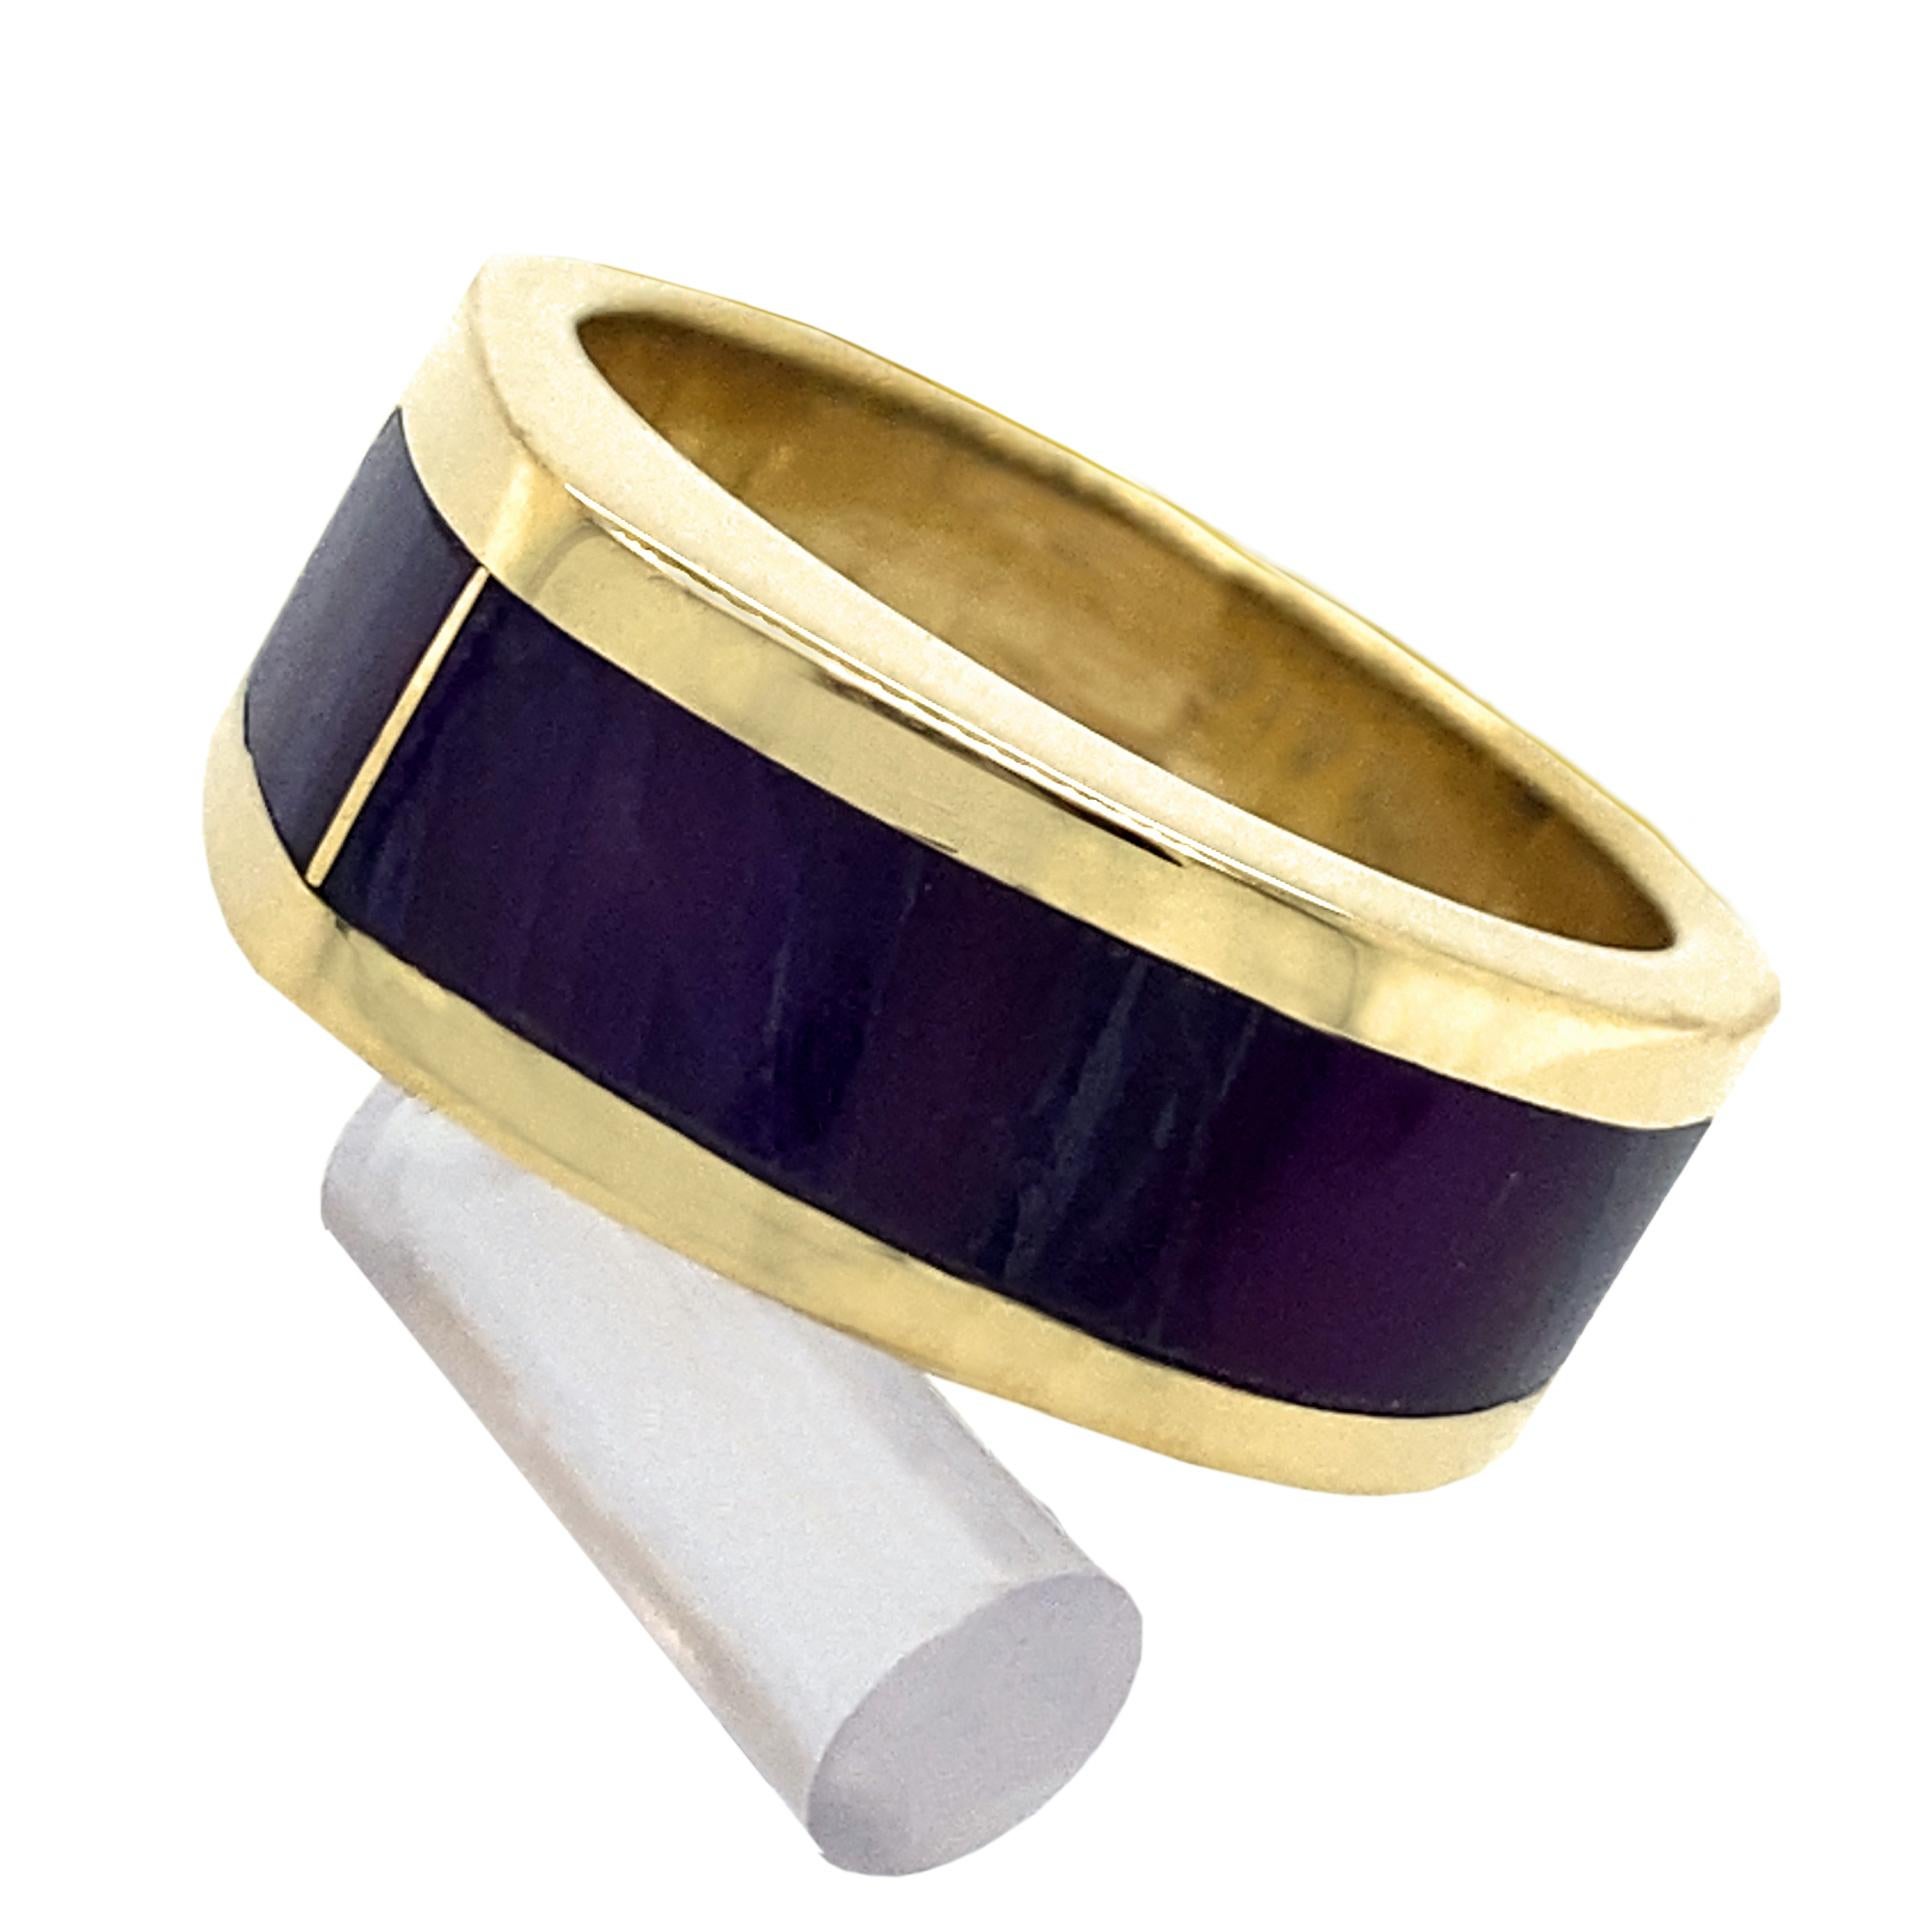 Eytan Brandes created this sleek design years ago to be channel-set with diamond baguettes.  Recently, however, he rediscovered an old sugilite mineral sample among his many drawers of Interesting Jeweler Stuff and thought it would look great as the